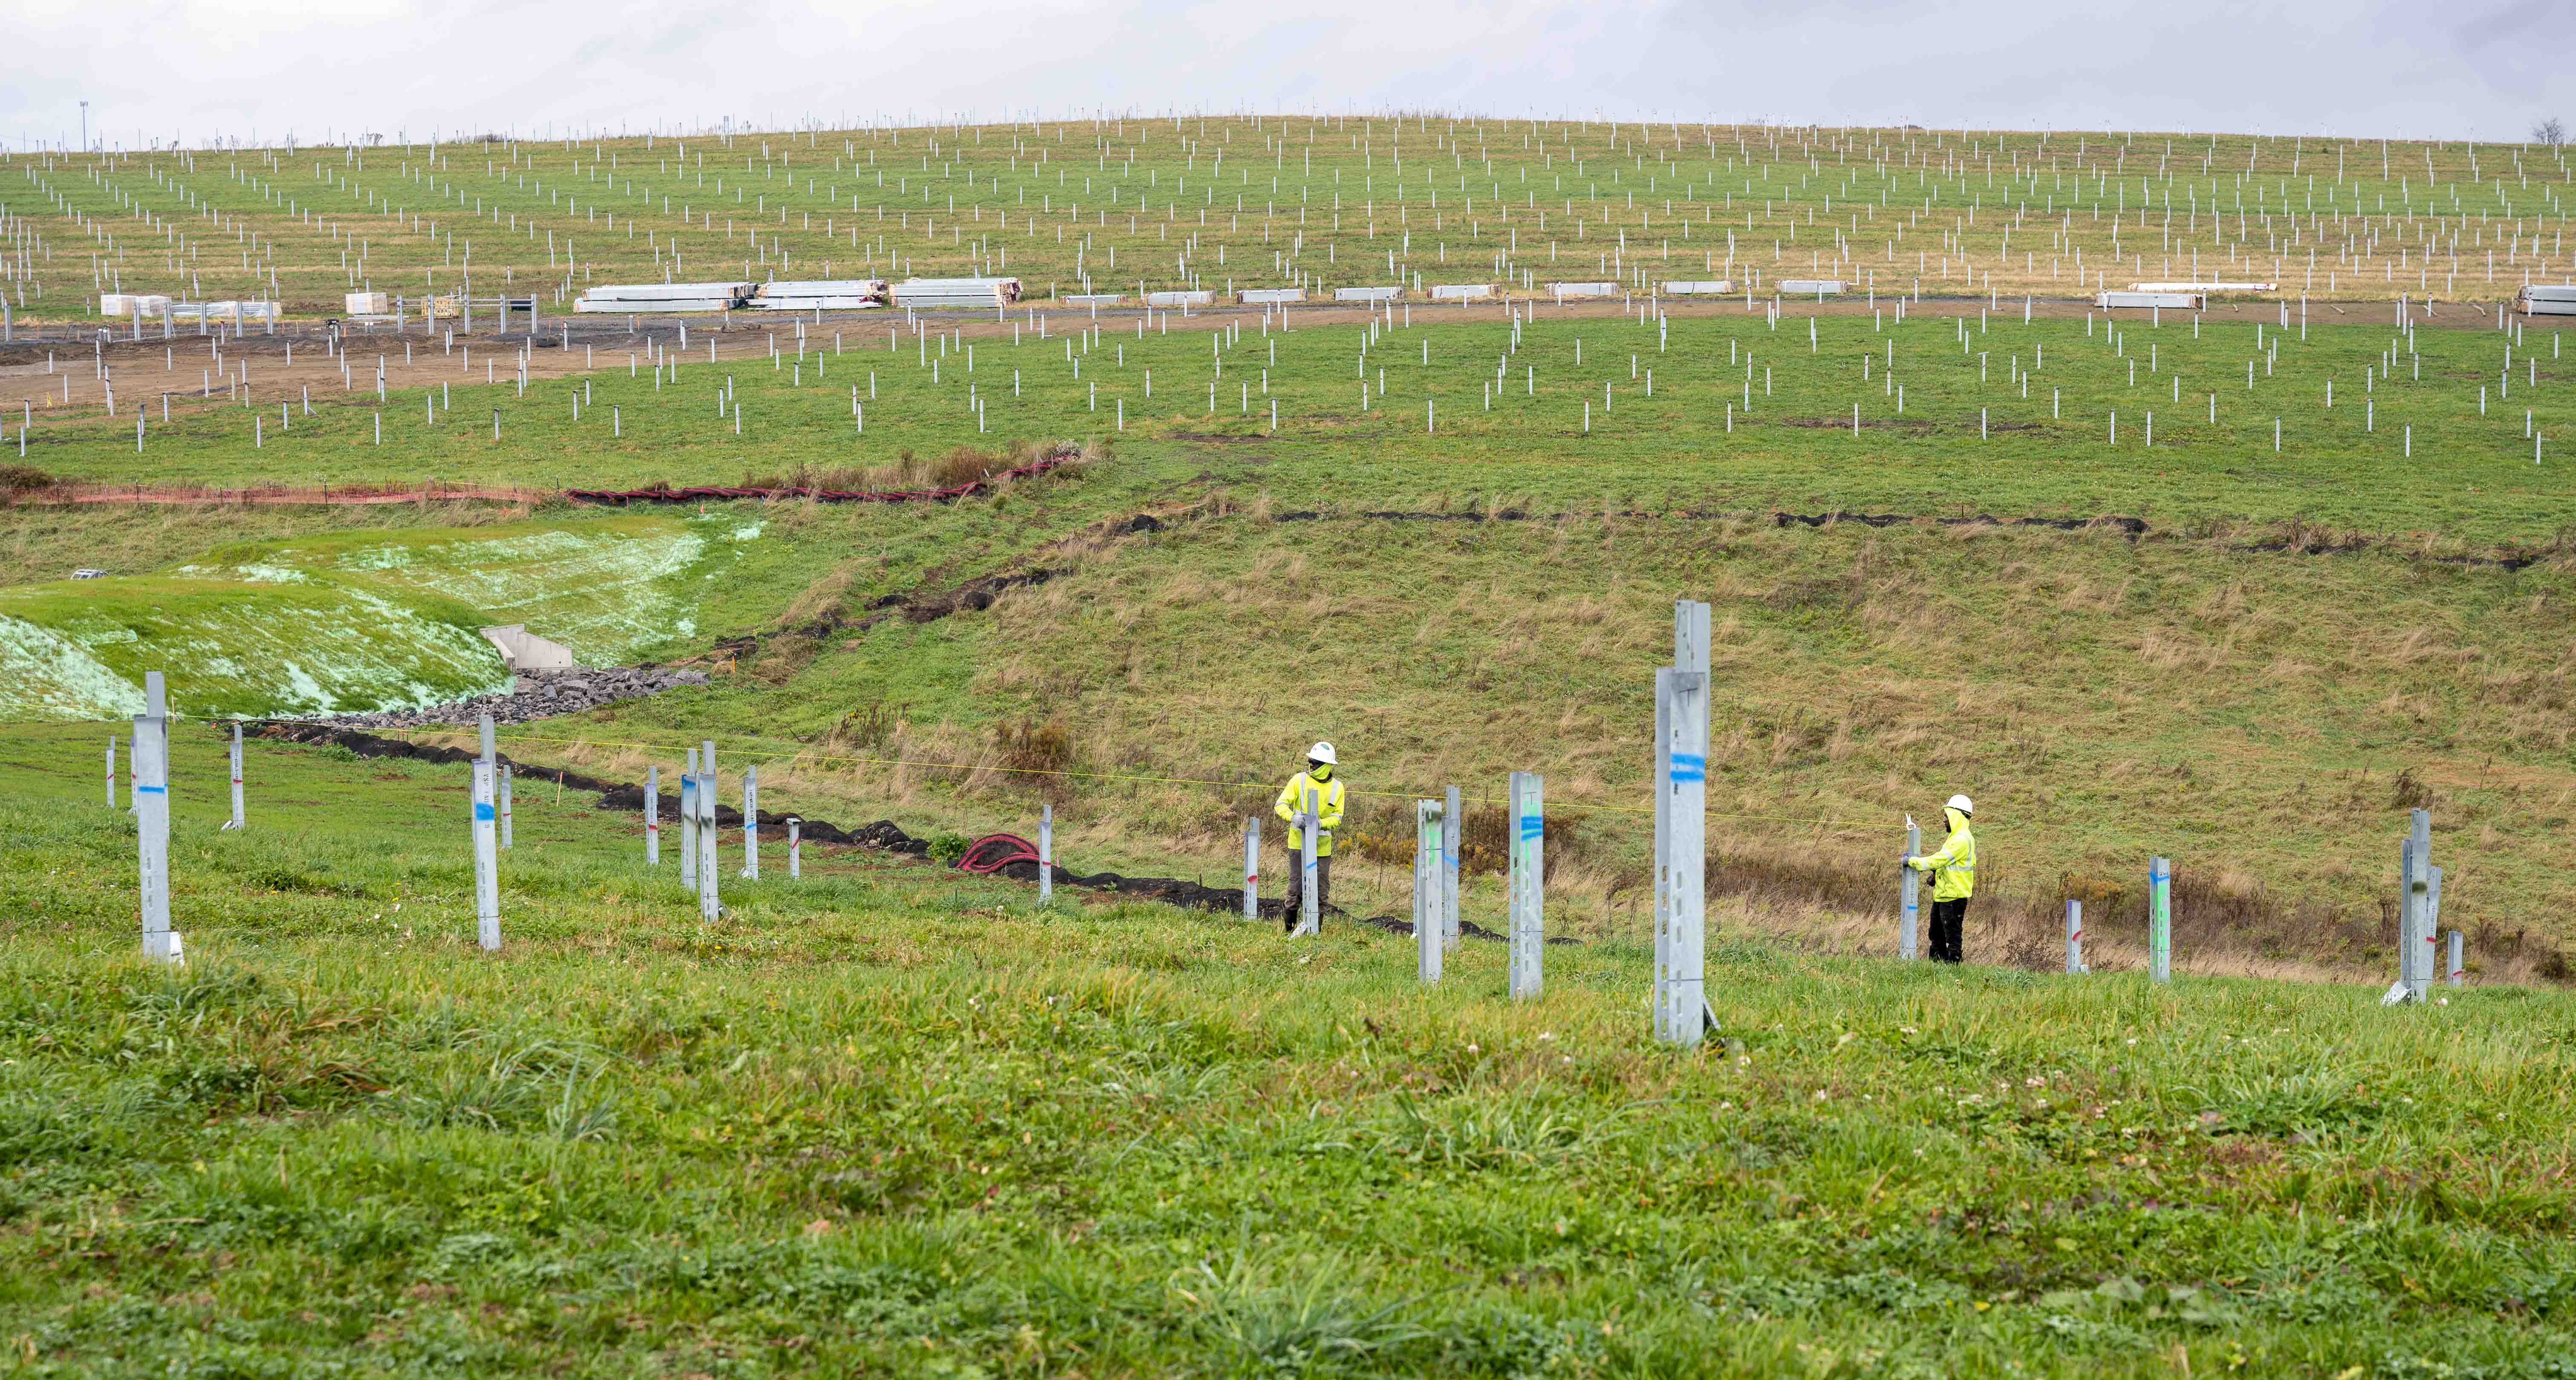 Poles are ready for solar panels to be installed at the Gaucho Vesper Solar Farm